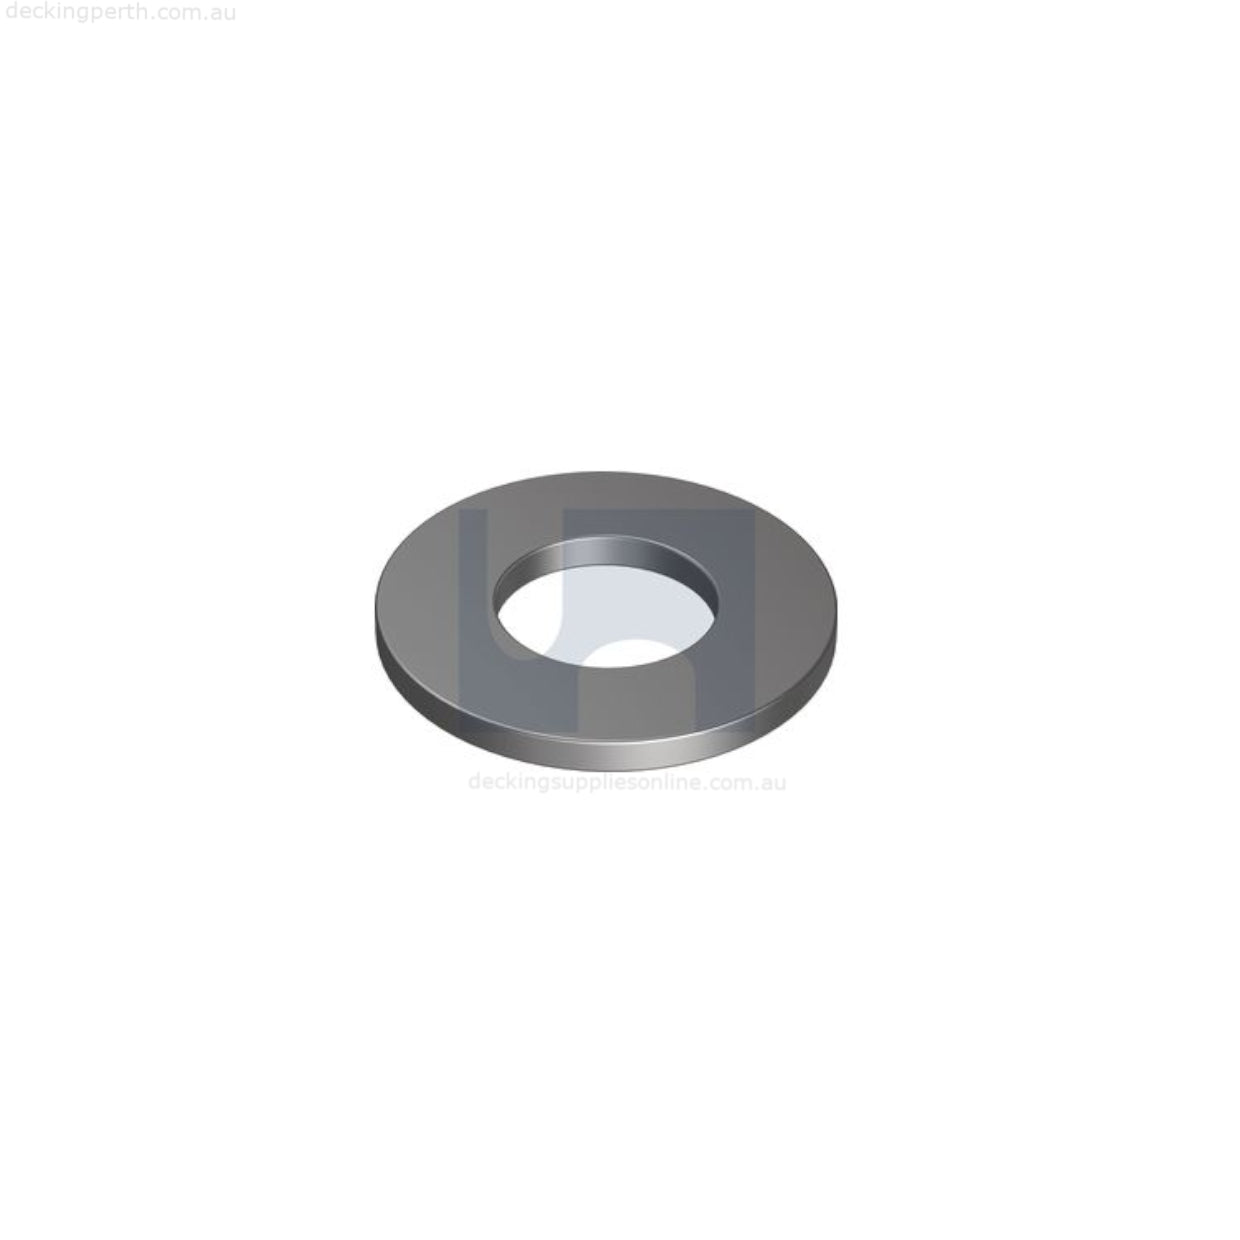    Hobson_Stainless_Steel_M10_x_22.5_Washers_Decking_Supplies_Online_1